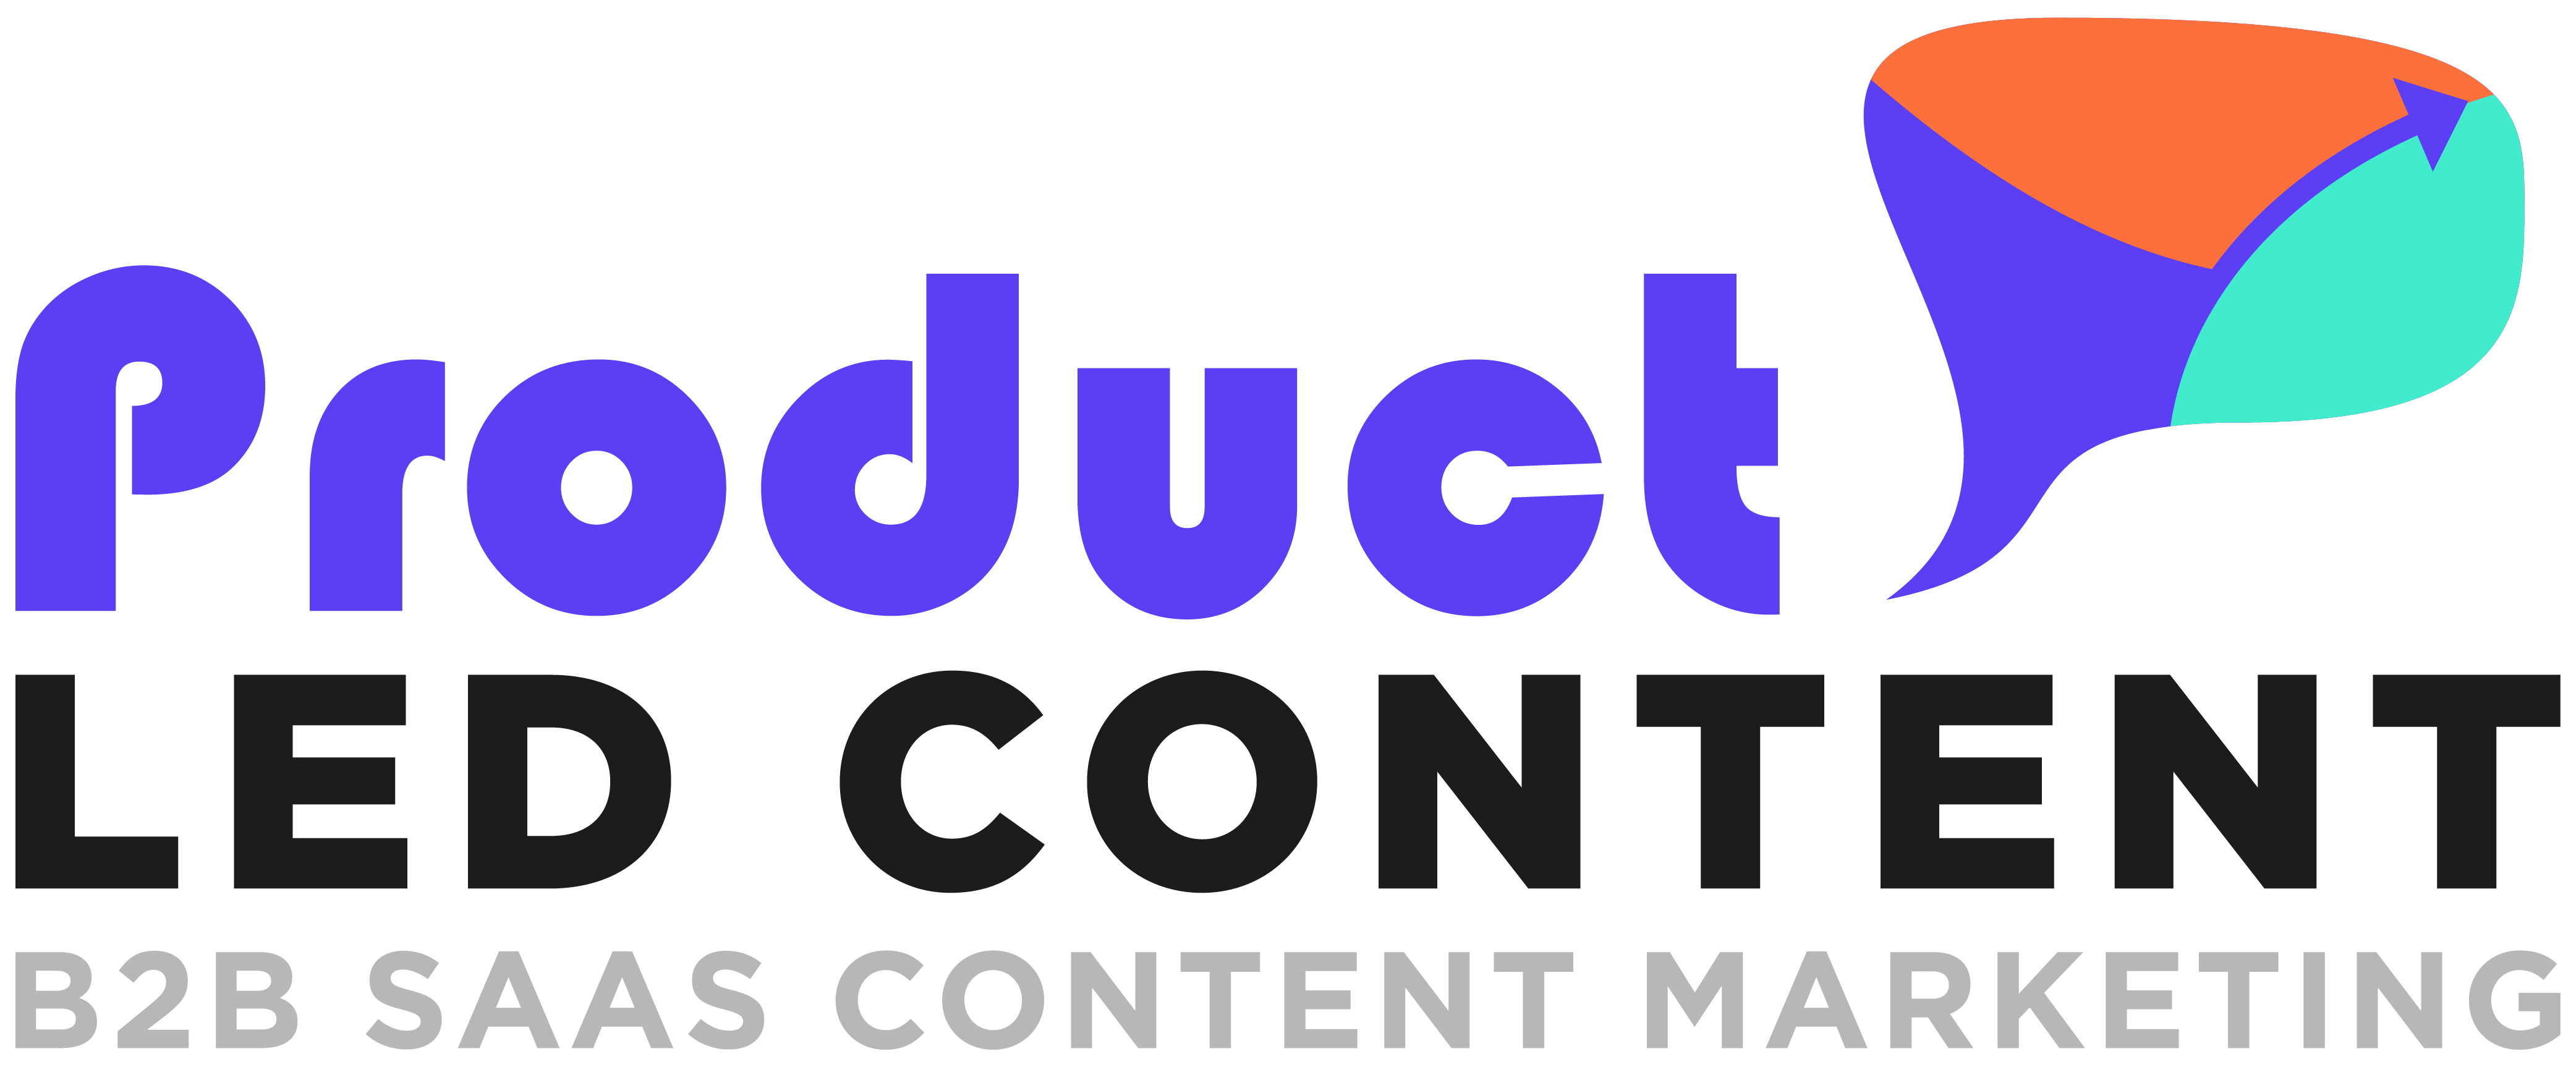 Product Led Content - B2B SaaS Content Marketing